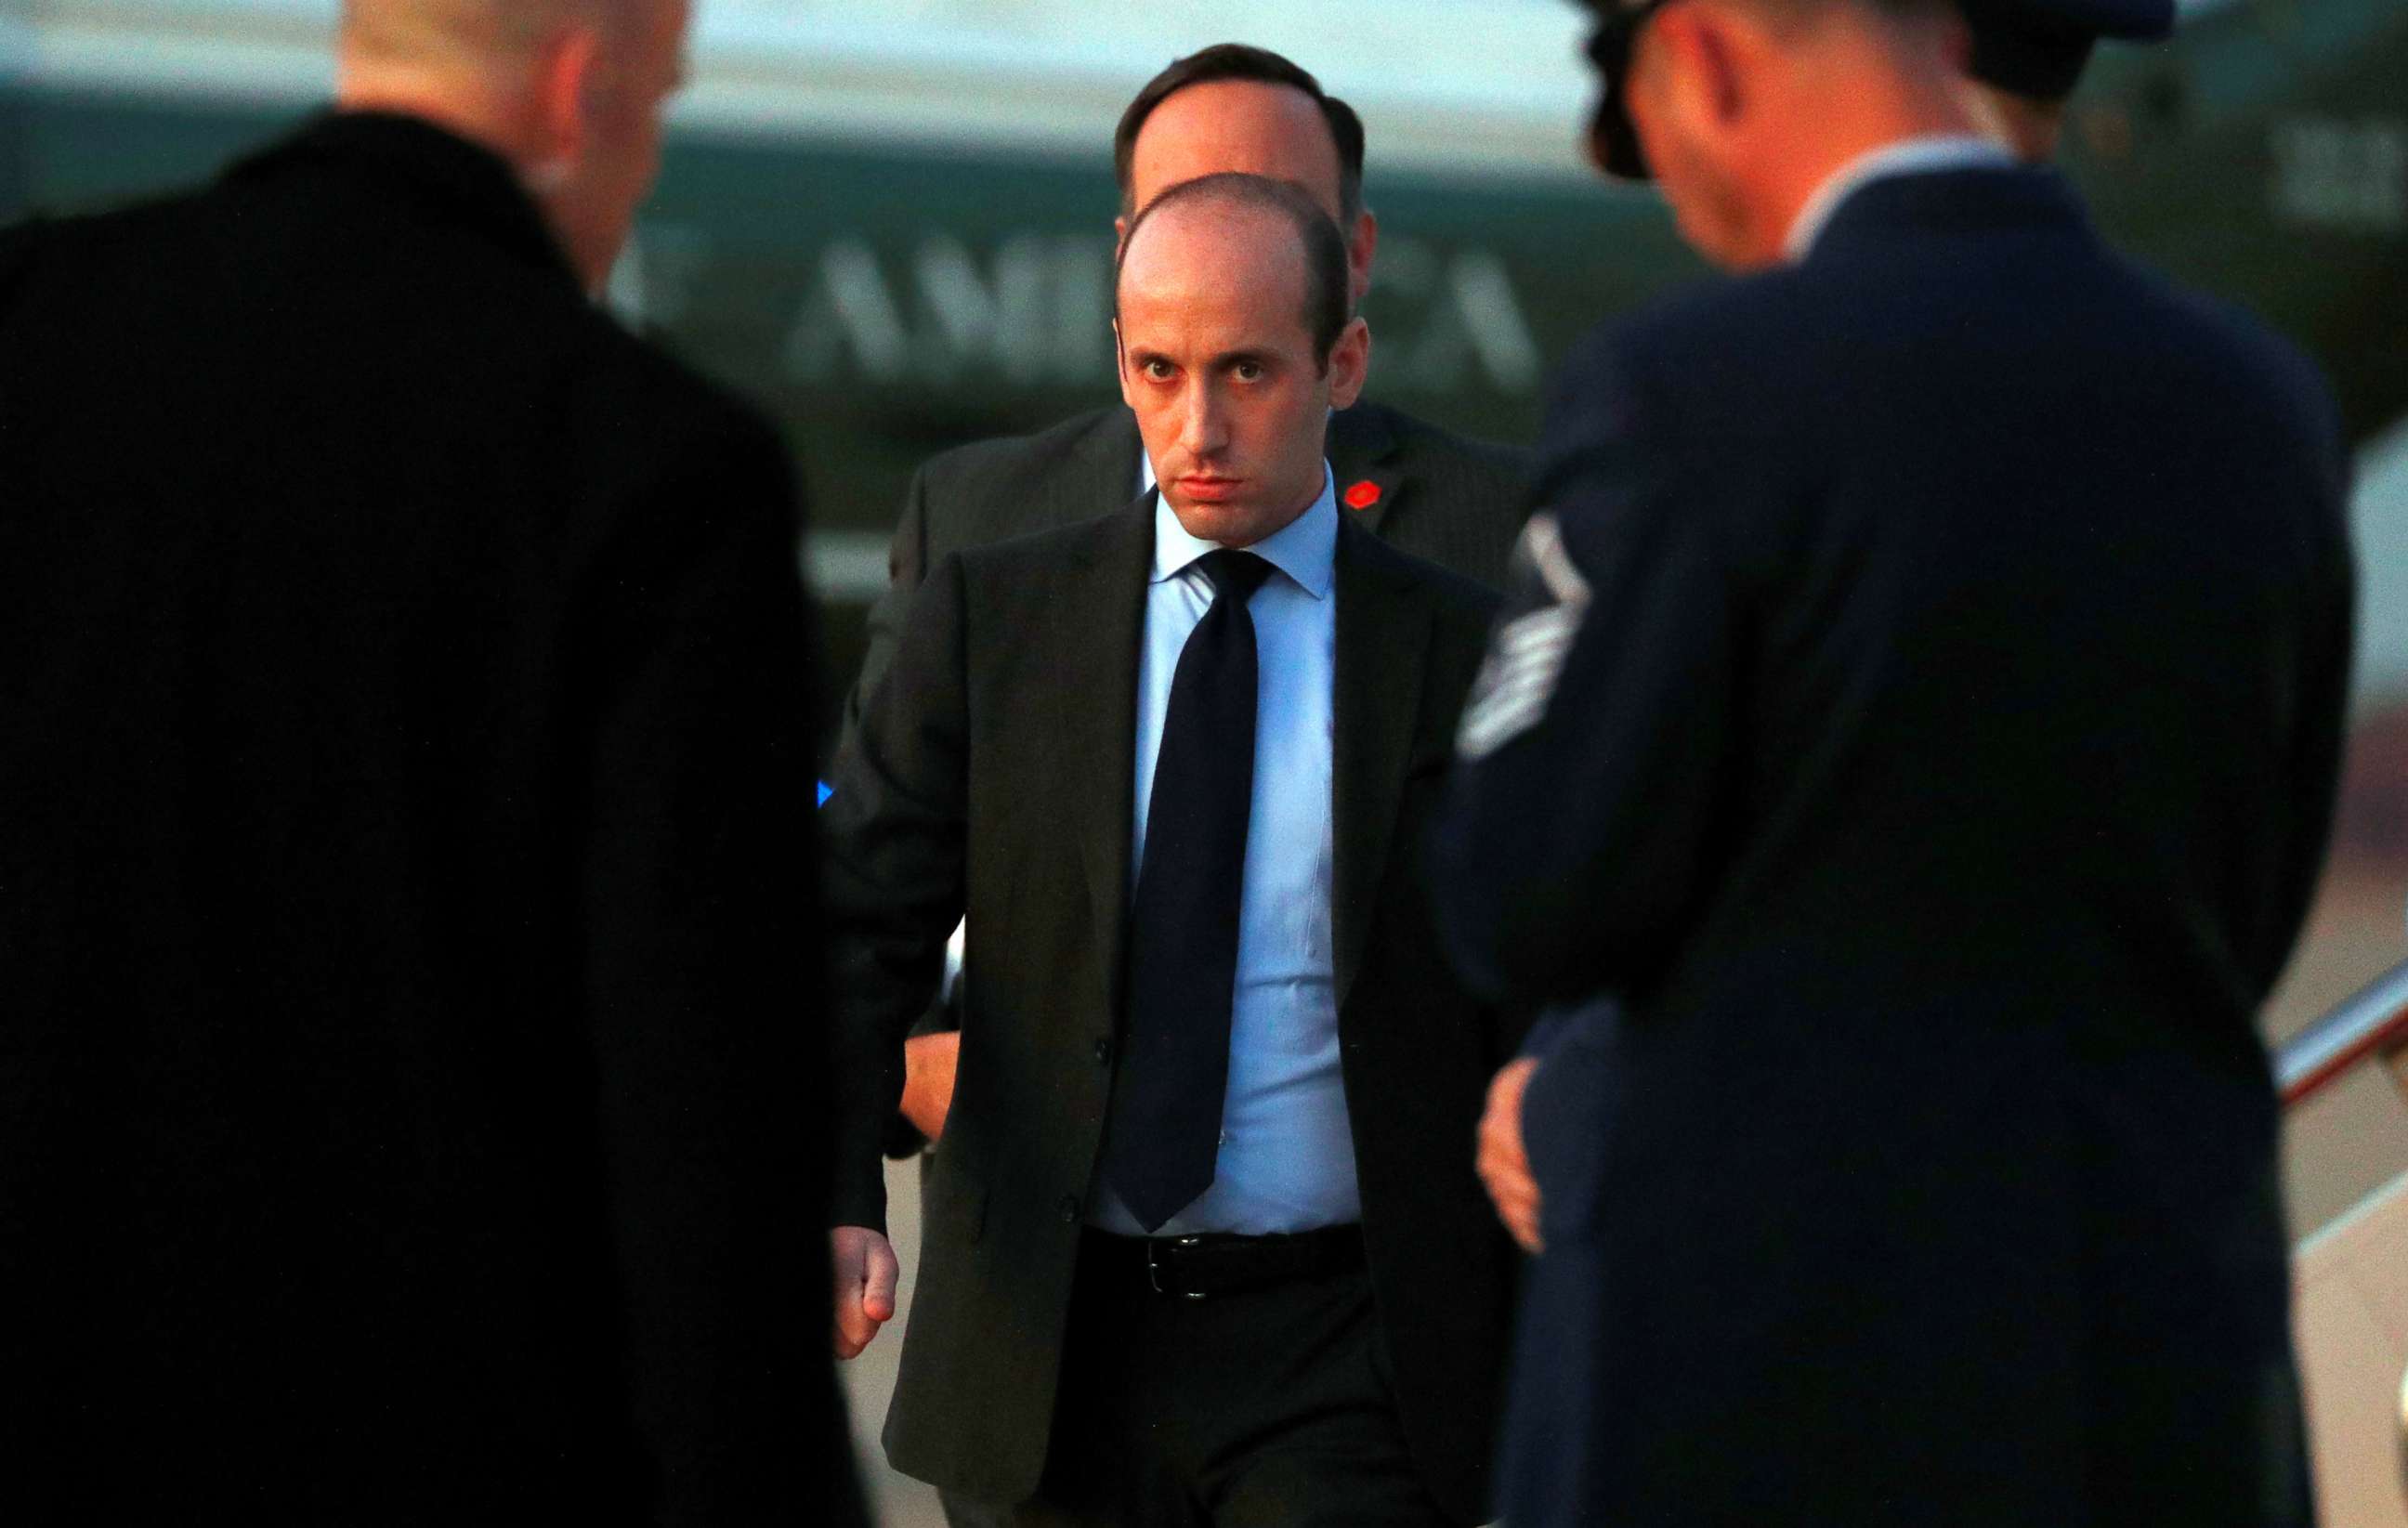 PHOTO: White House senior policy adviser Stephen Miller boards Air Force One to depart Washington with U.S. President Donald Trump for travel to Louisiana at Joint Base Andrews, Maryland, Nov. 14, 2019.